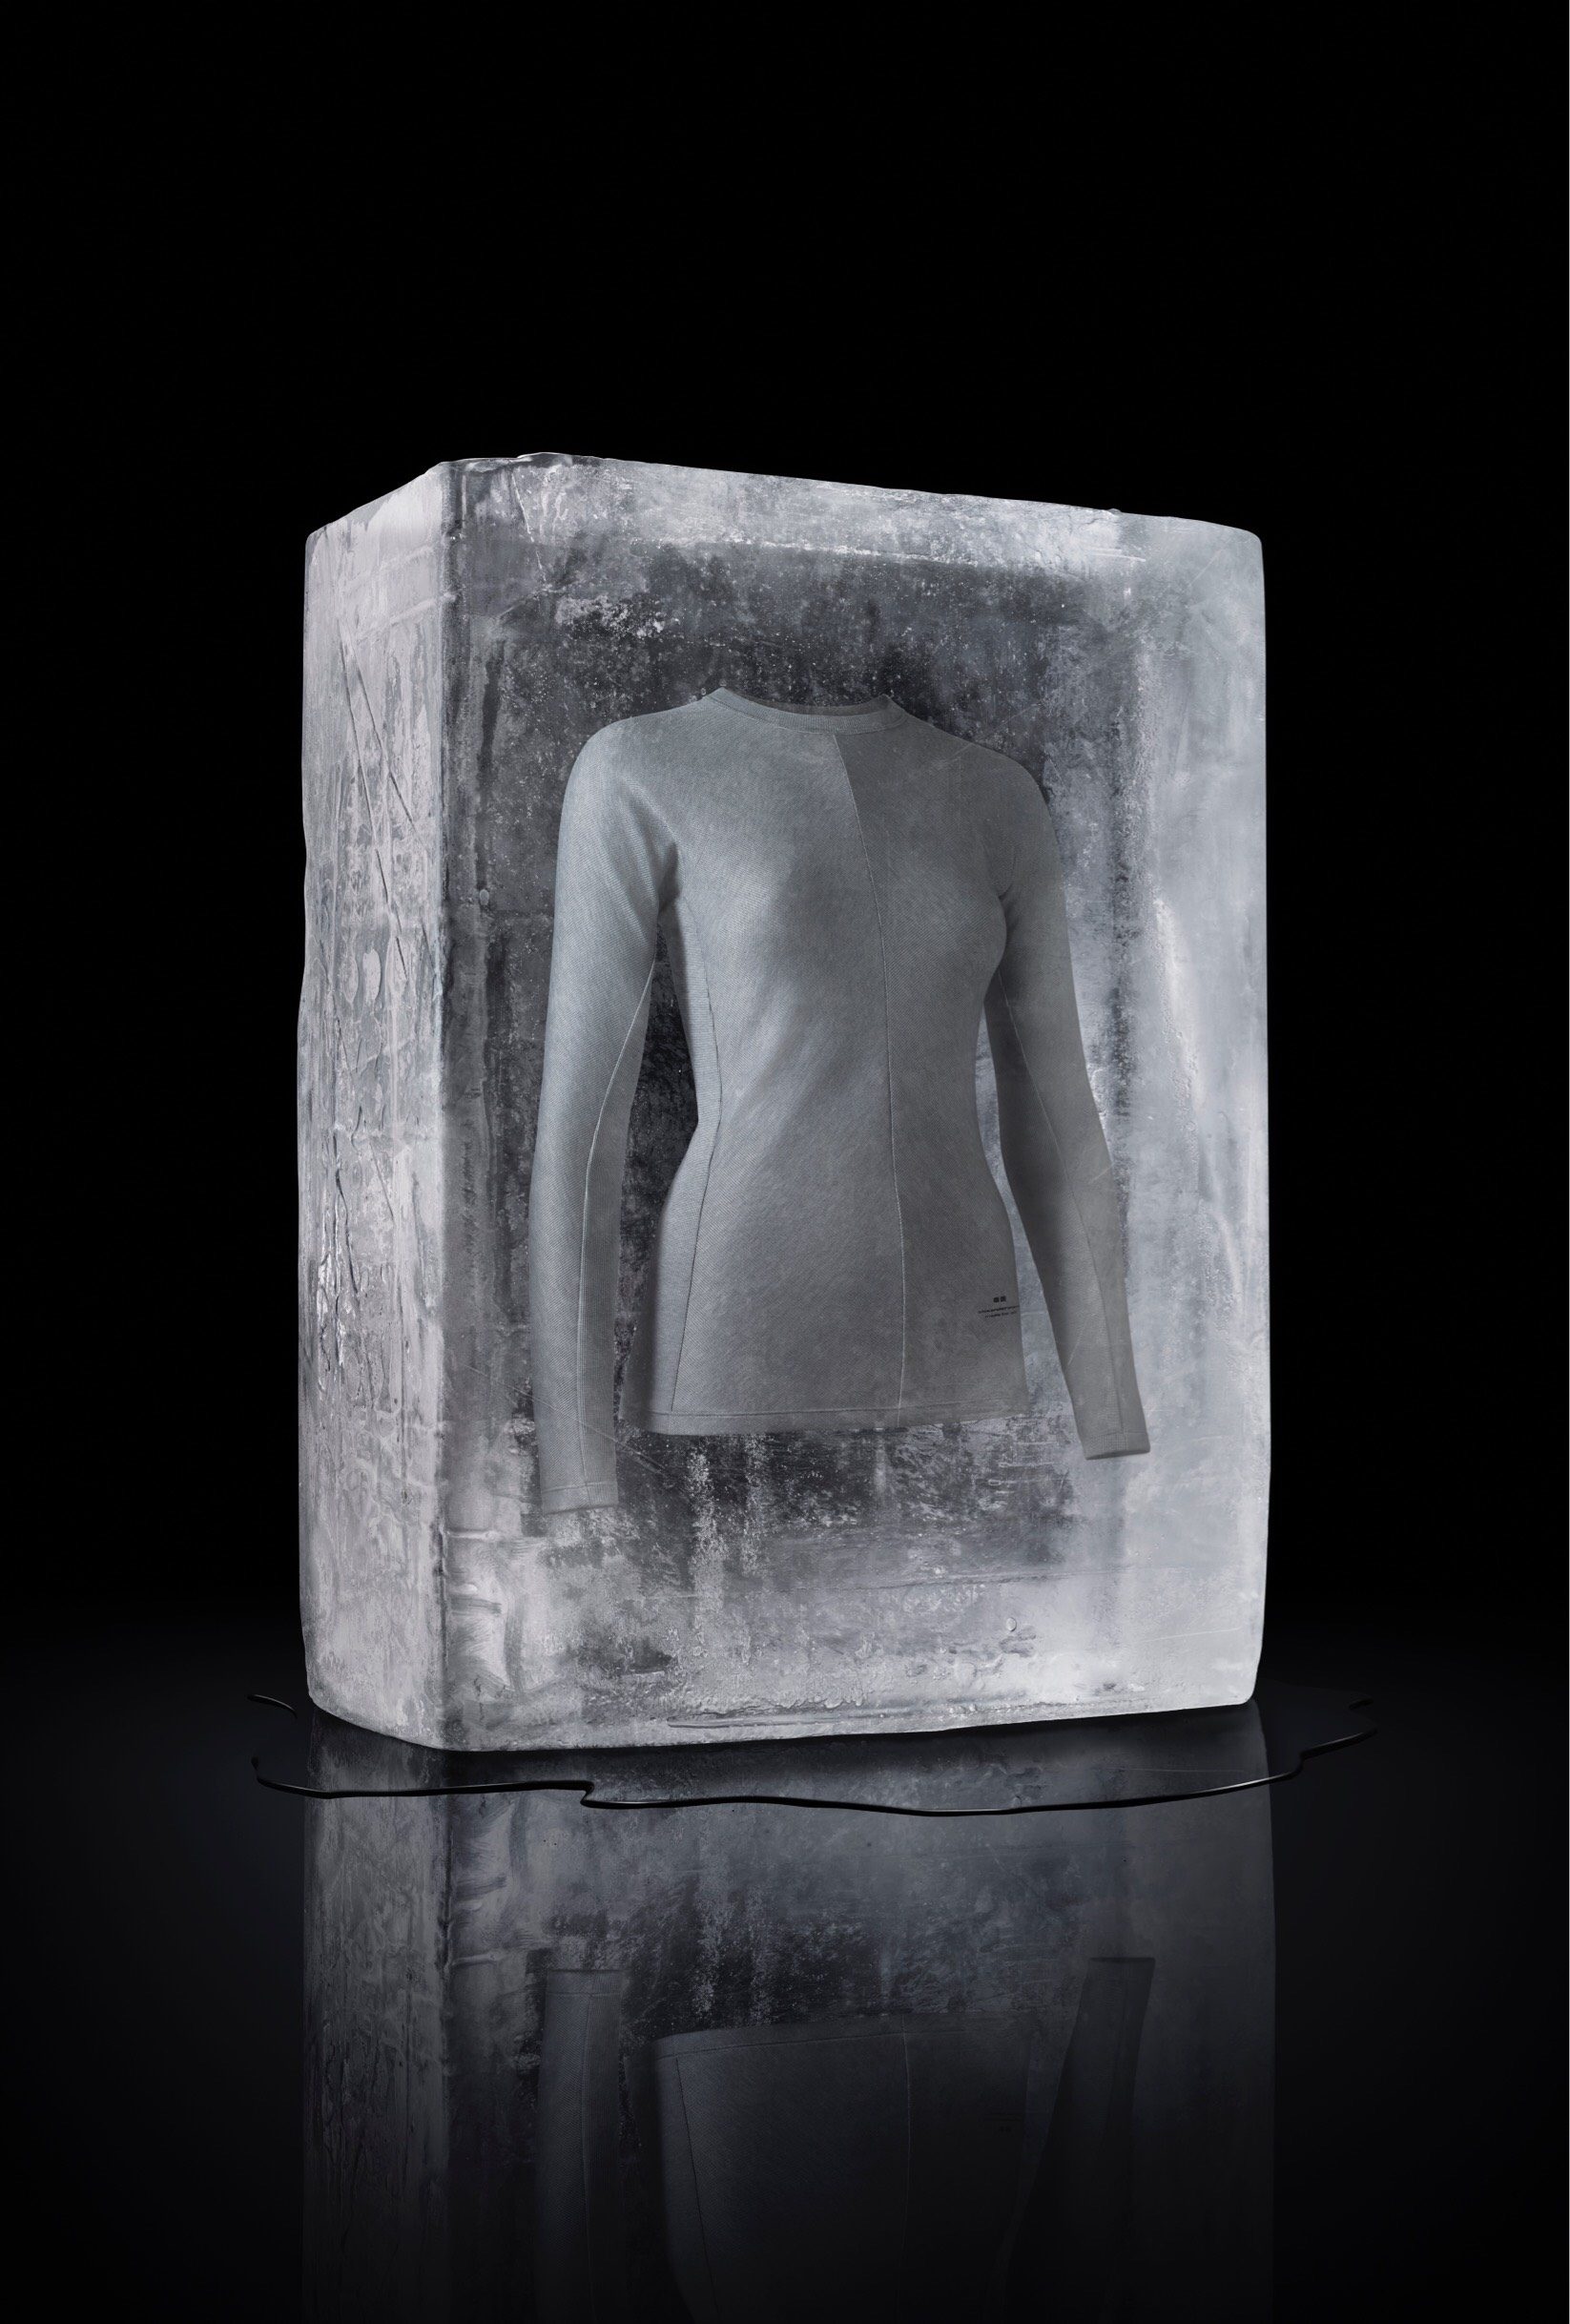 ‘WARMTH REIMAGINED.’ Promotional photo shows the collection’s pieces inside an ice block, and according to the press release, ‘express[es] the thought that Heattech transcends fhe cold and is warm enough to melt away the ice it is encased in.’ Photo courtesy of Uniqlo 